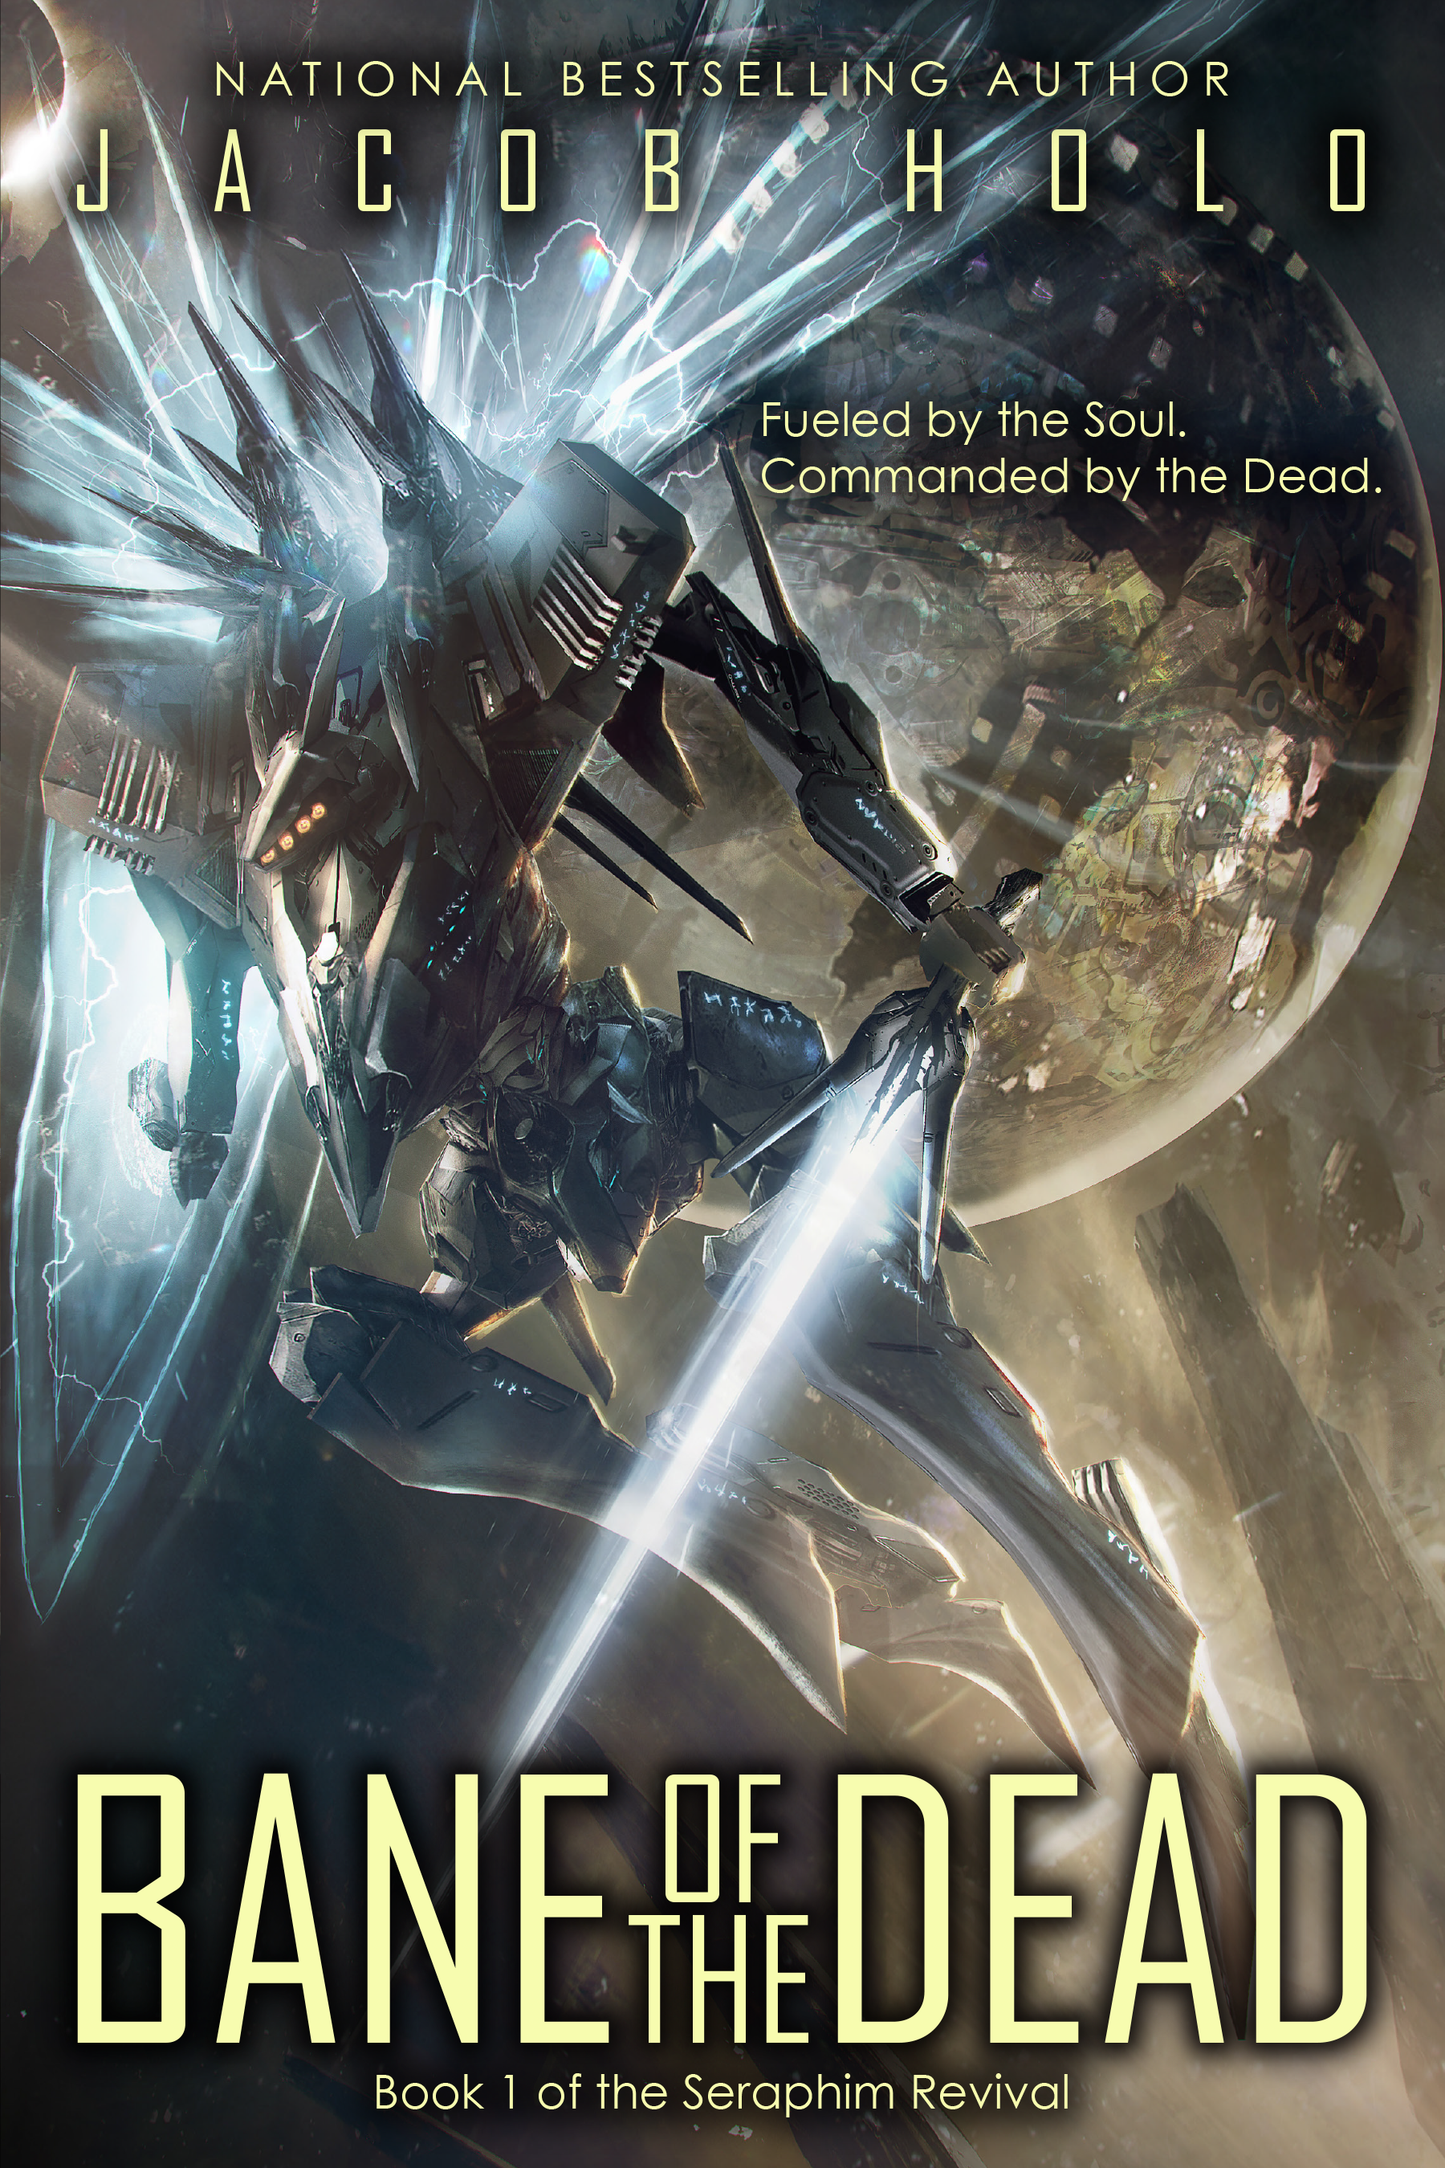 PRINT: Bane of the Dead (SIGNED Paperback - LIMITED OLD COVER EDITION)